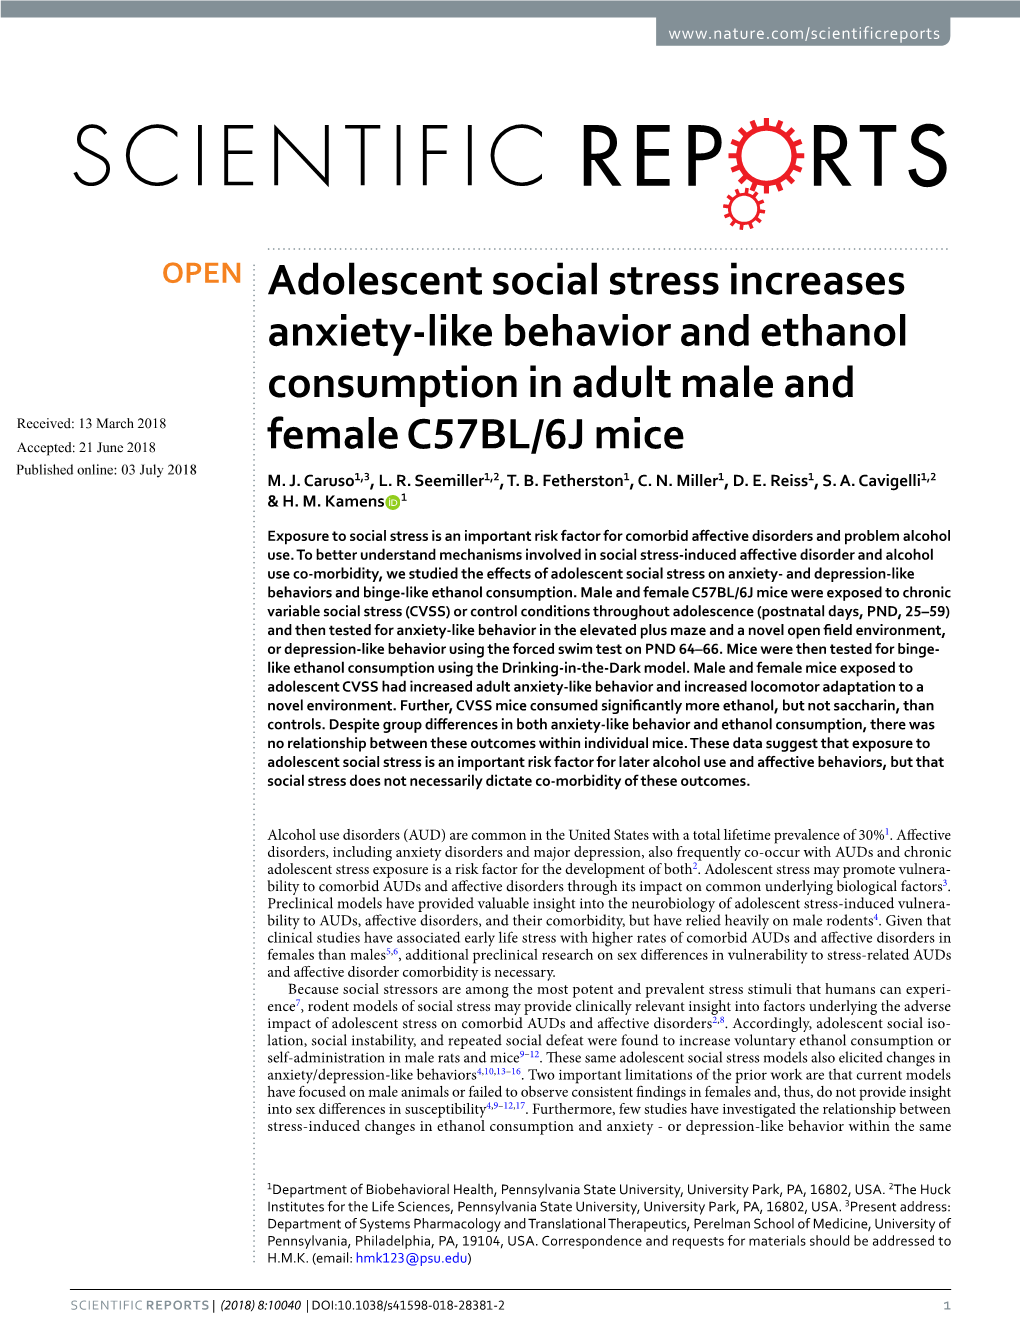 Adolescent Social Stress Increases Anxiety-Like Behavior and Ethanol